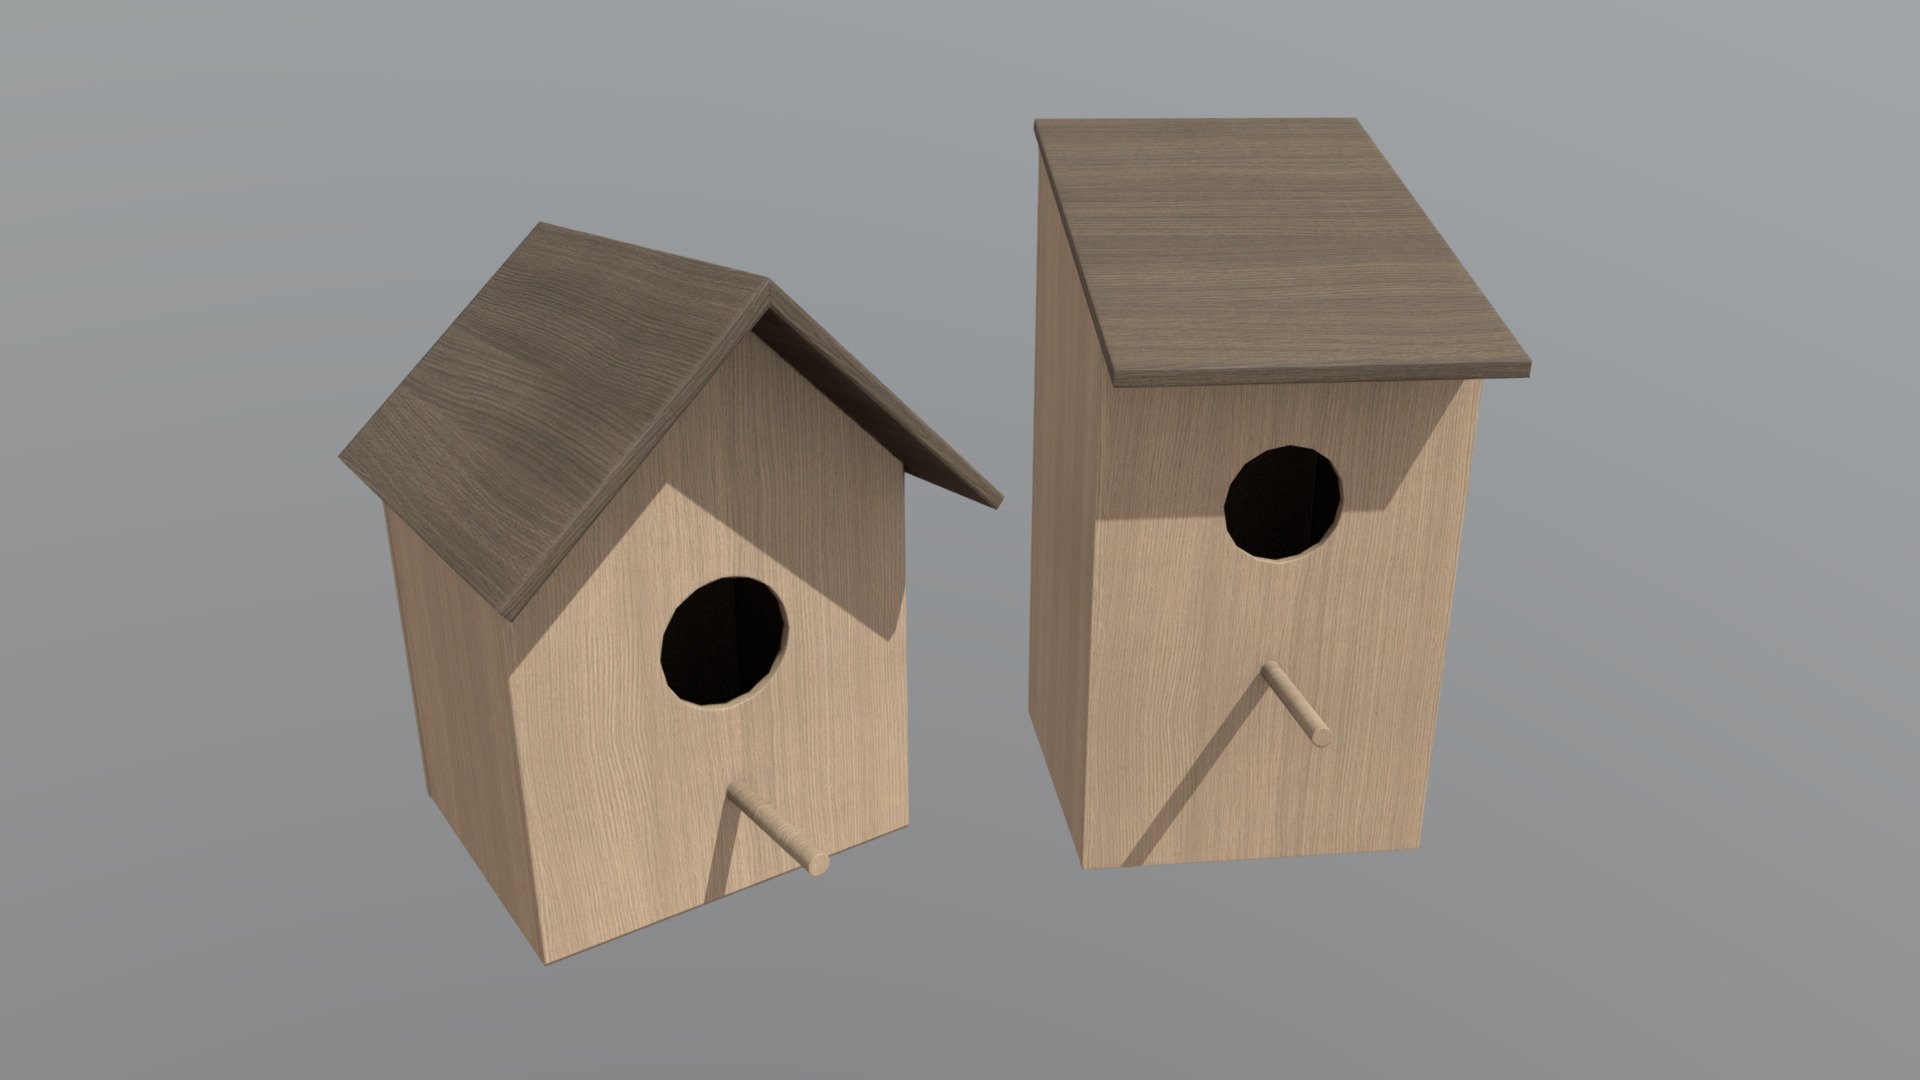 ‘It’s a good idea to built a birdhouse - so why not built two of them, it's even better.’

● 2048 x2048 PBR textures

● normal map is baked from the high poly model.

If you need help with this model or have a question – please do not hesitate to contact with me. I will be happy to help you.

Contact: plaggy.net@gmail.com - Birdhouse - Buy Royalty Free 3D model by plaggy 3d model